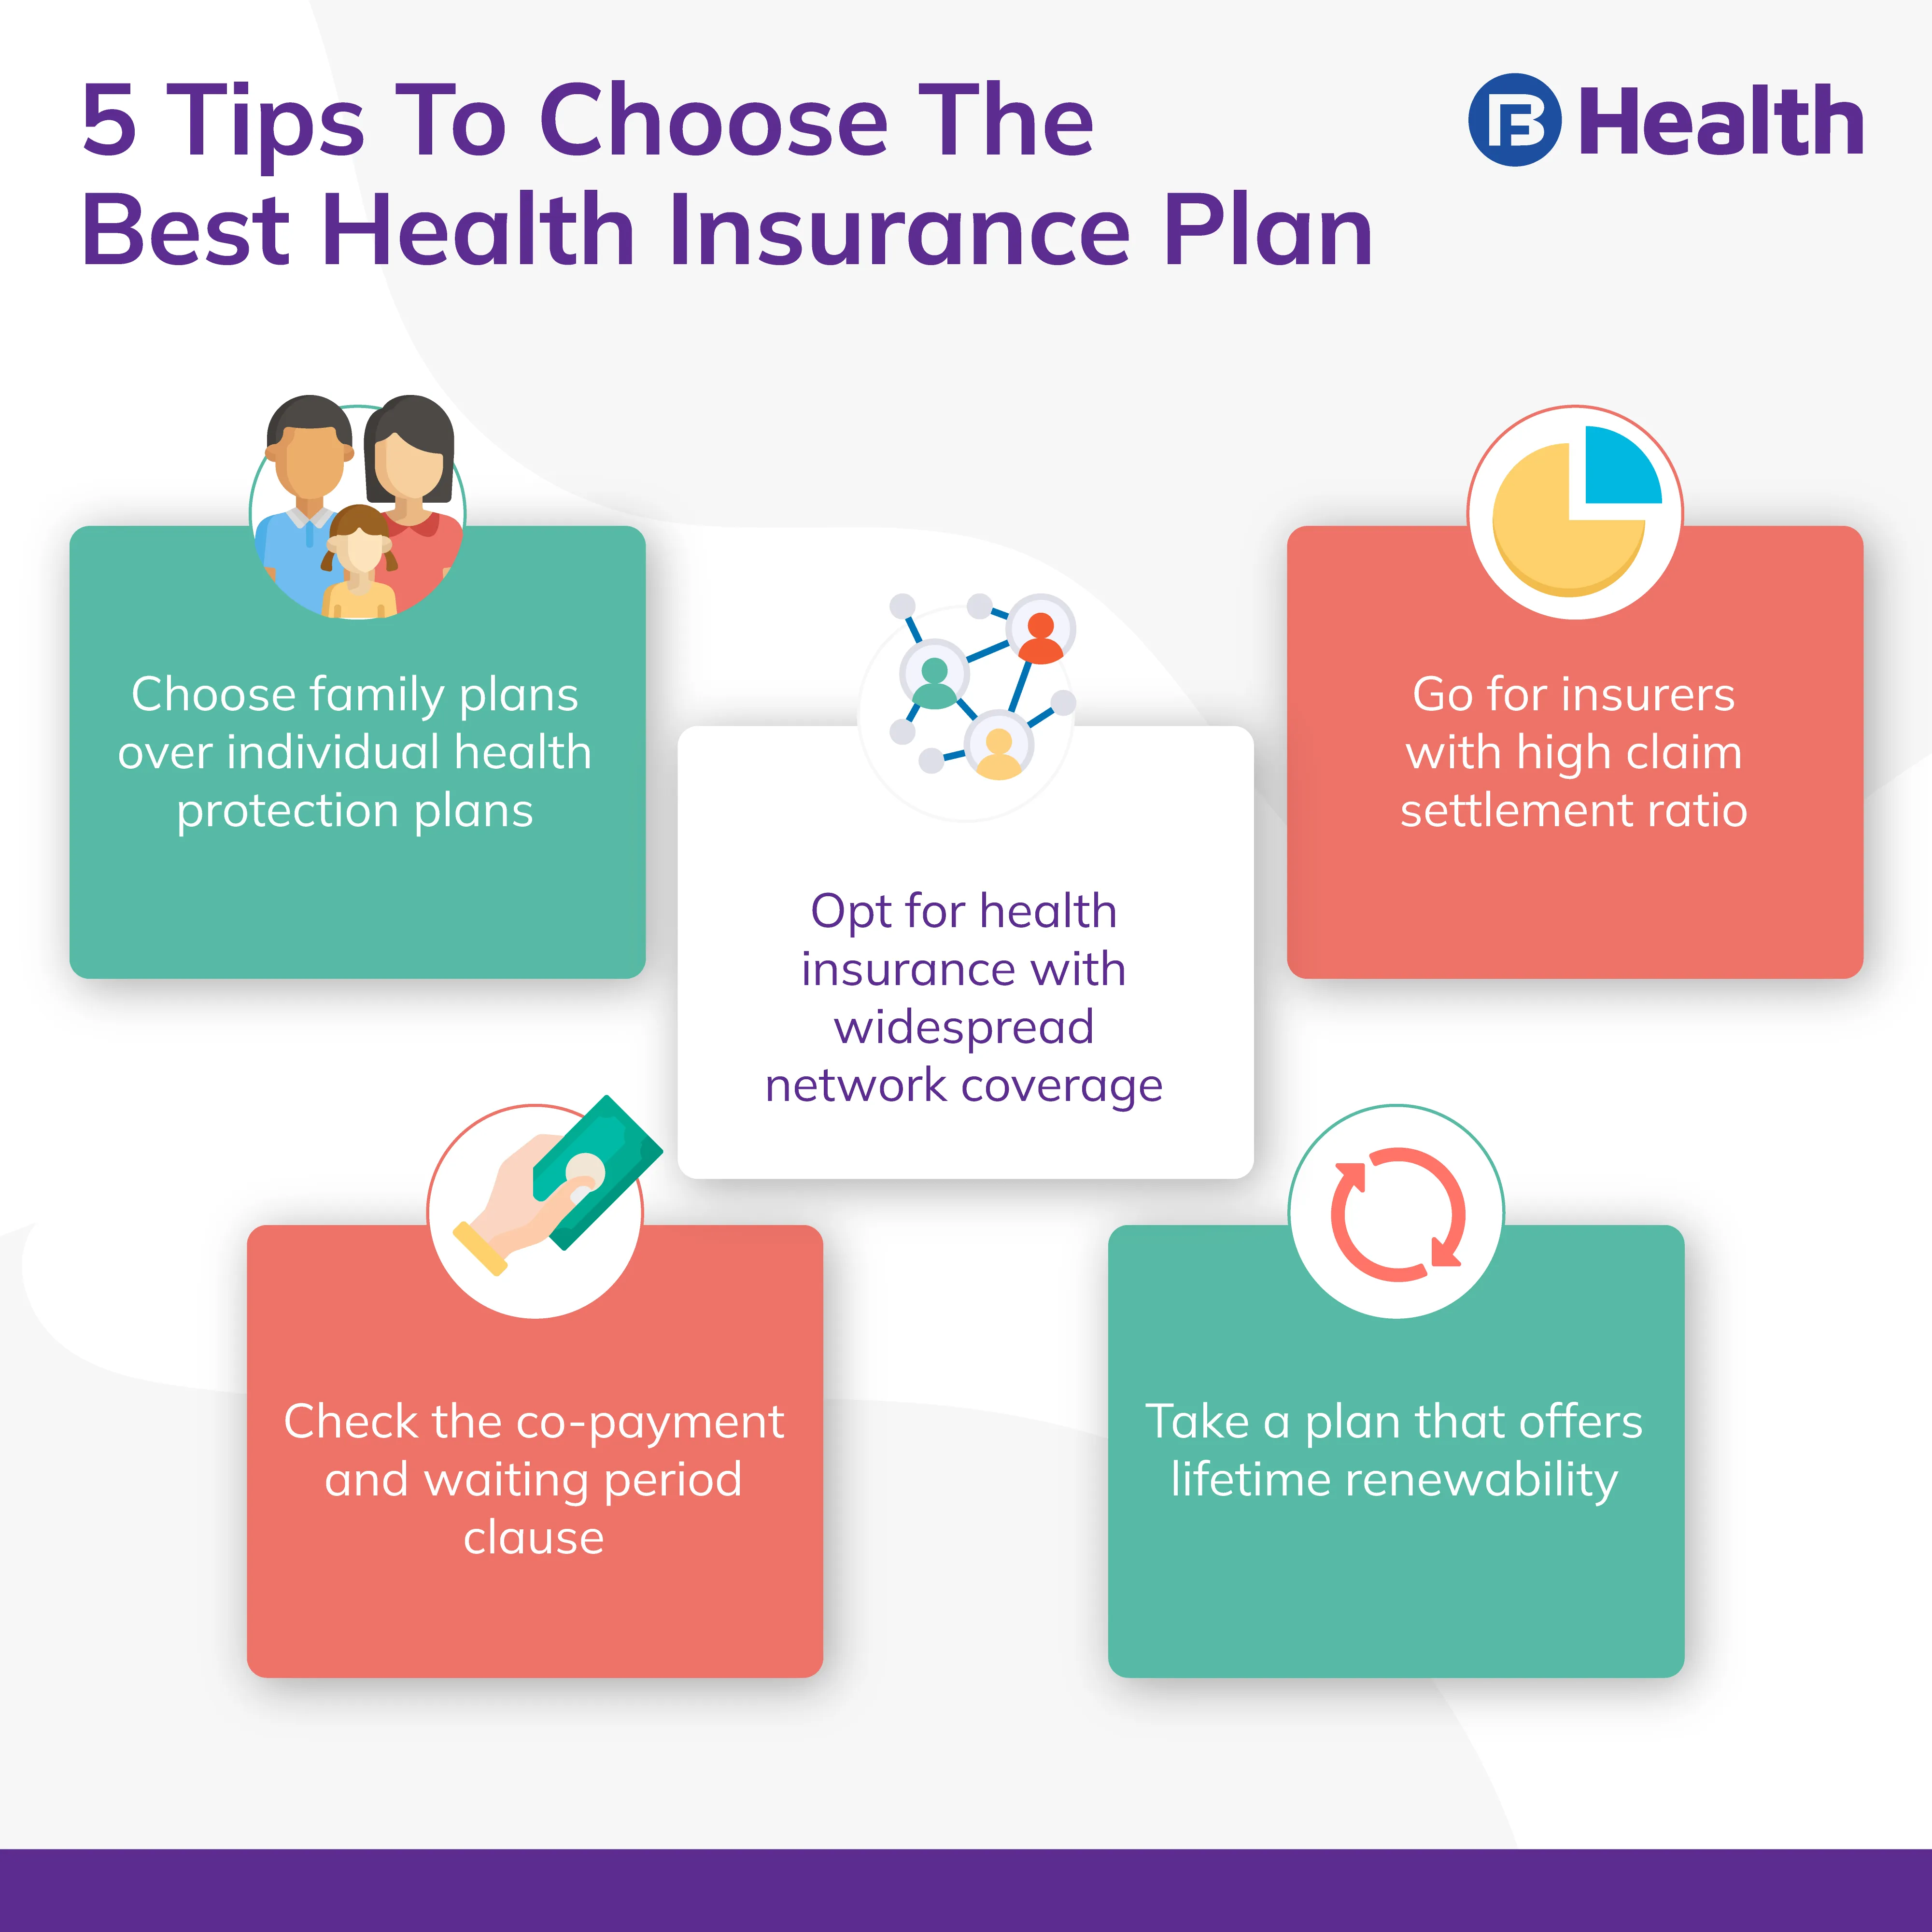 Tips to choose the best health insurance plan